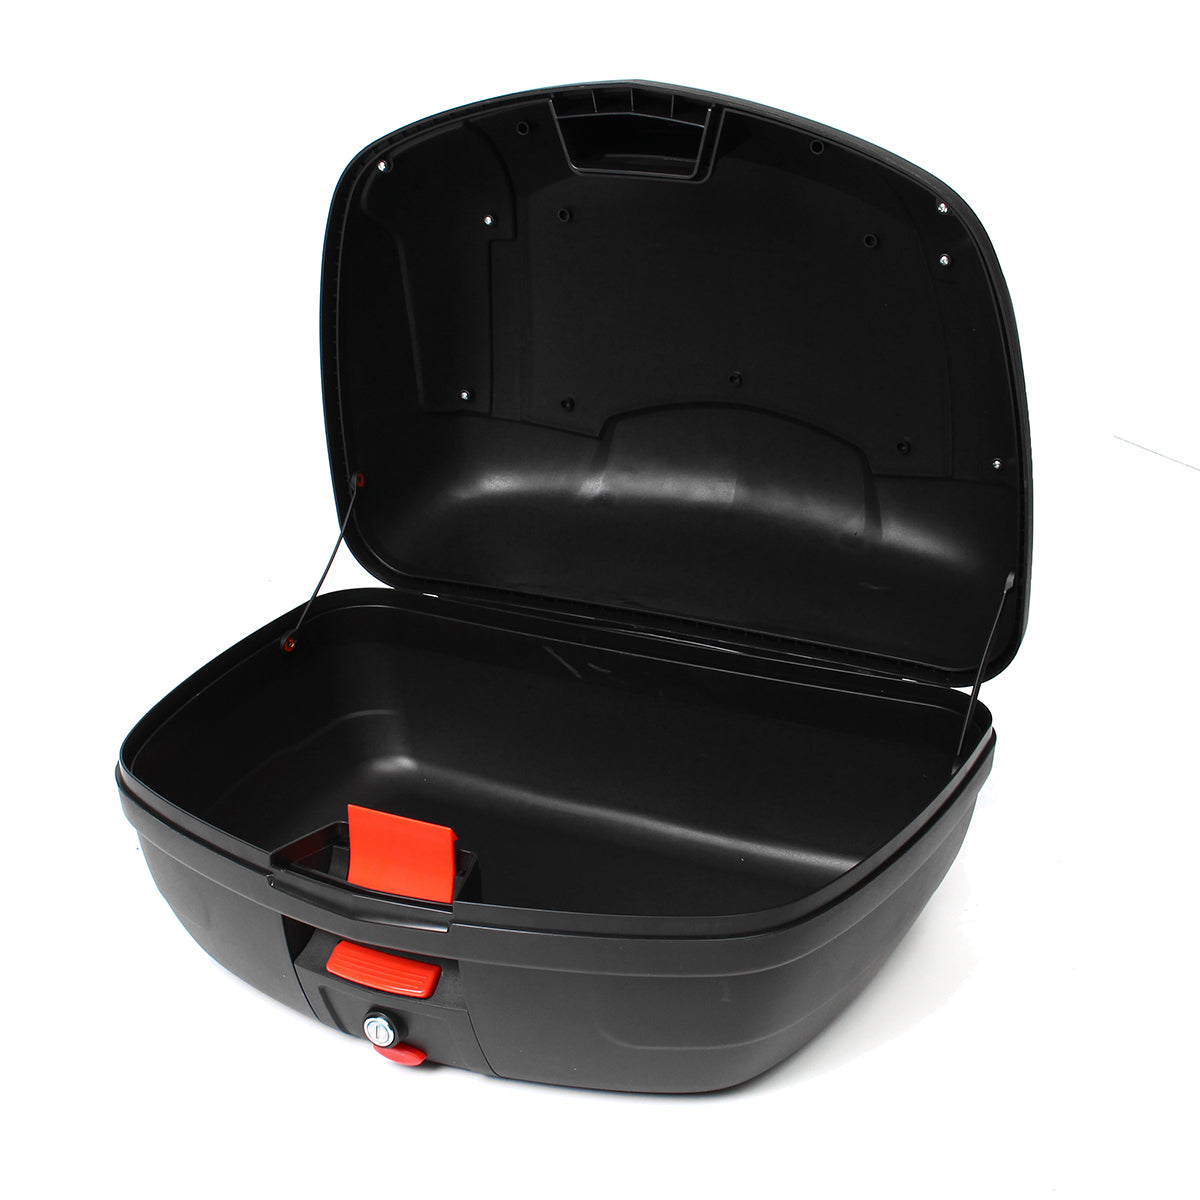 Black 52L Secure Latch Black Motorcycle Scooter Topbox Rear Storage Luggage Top Box